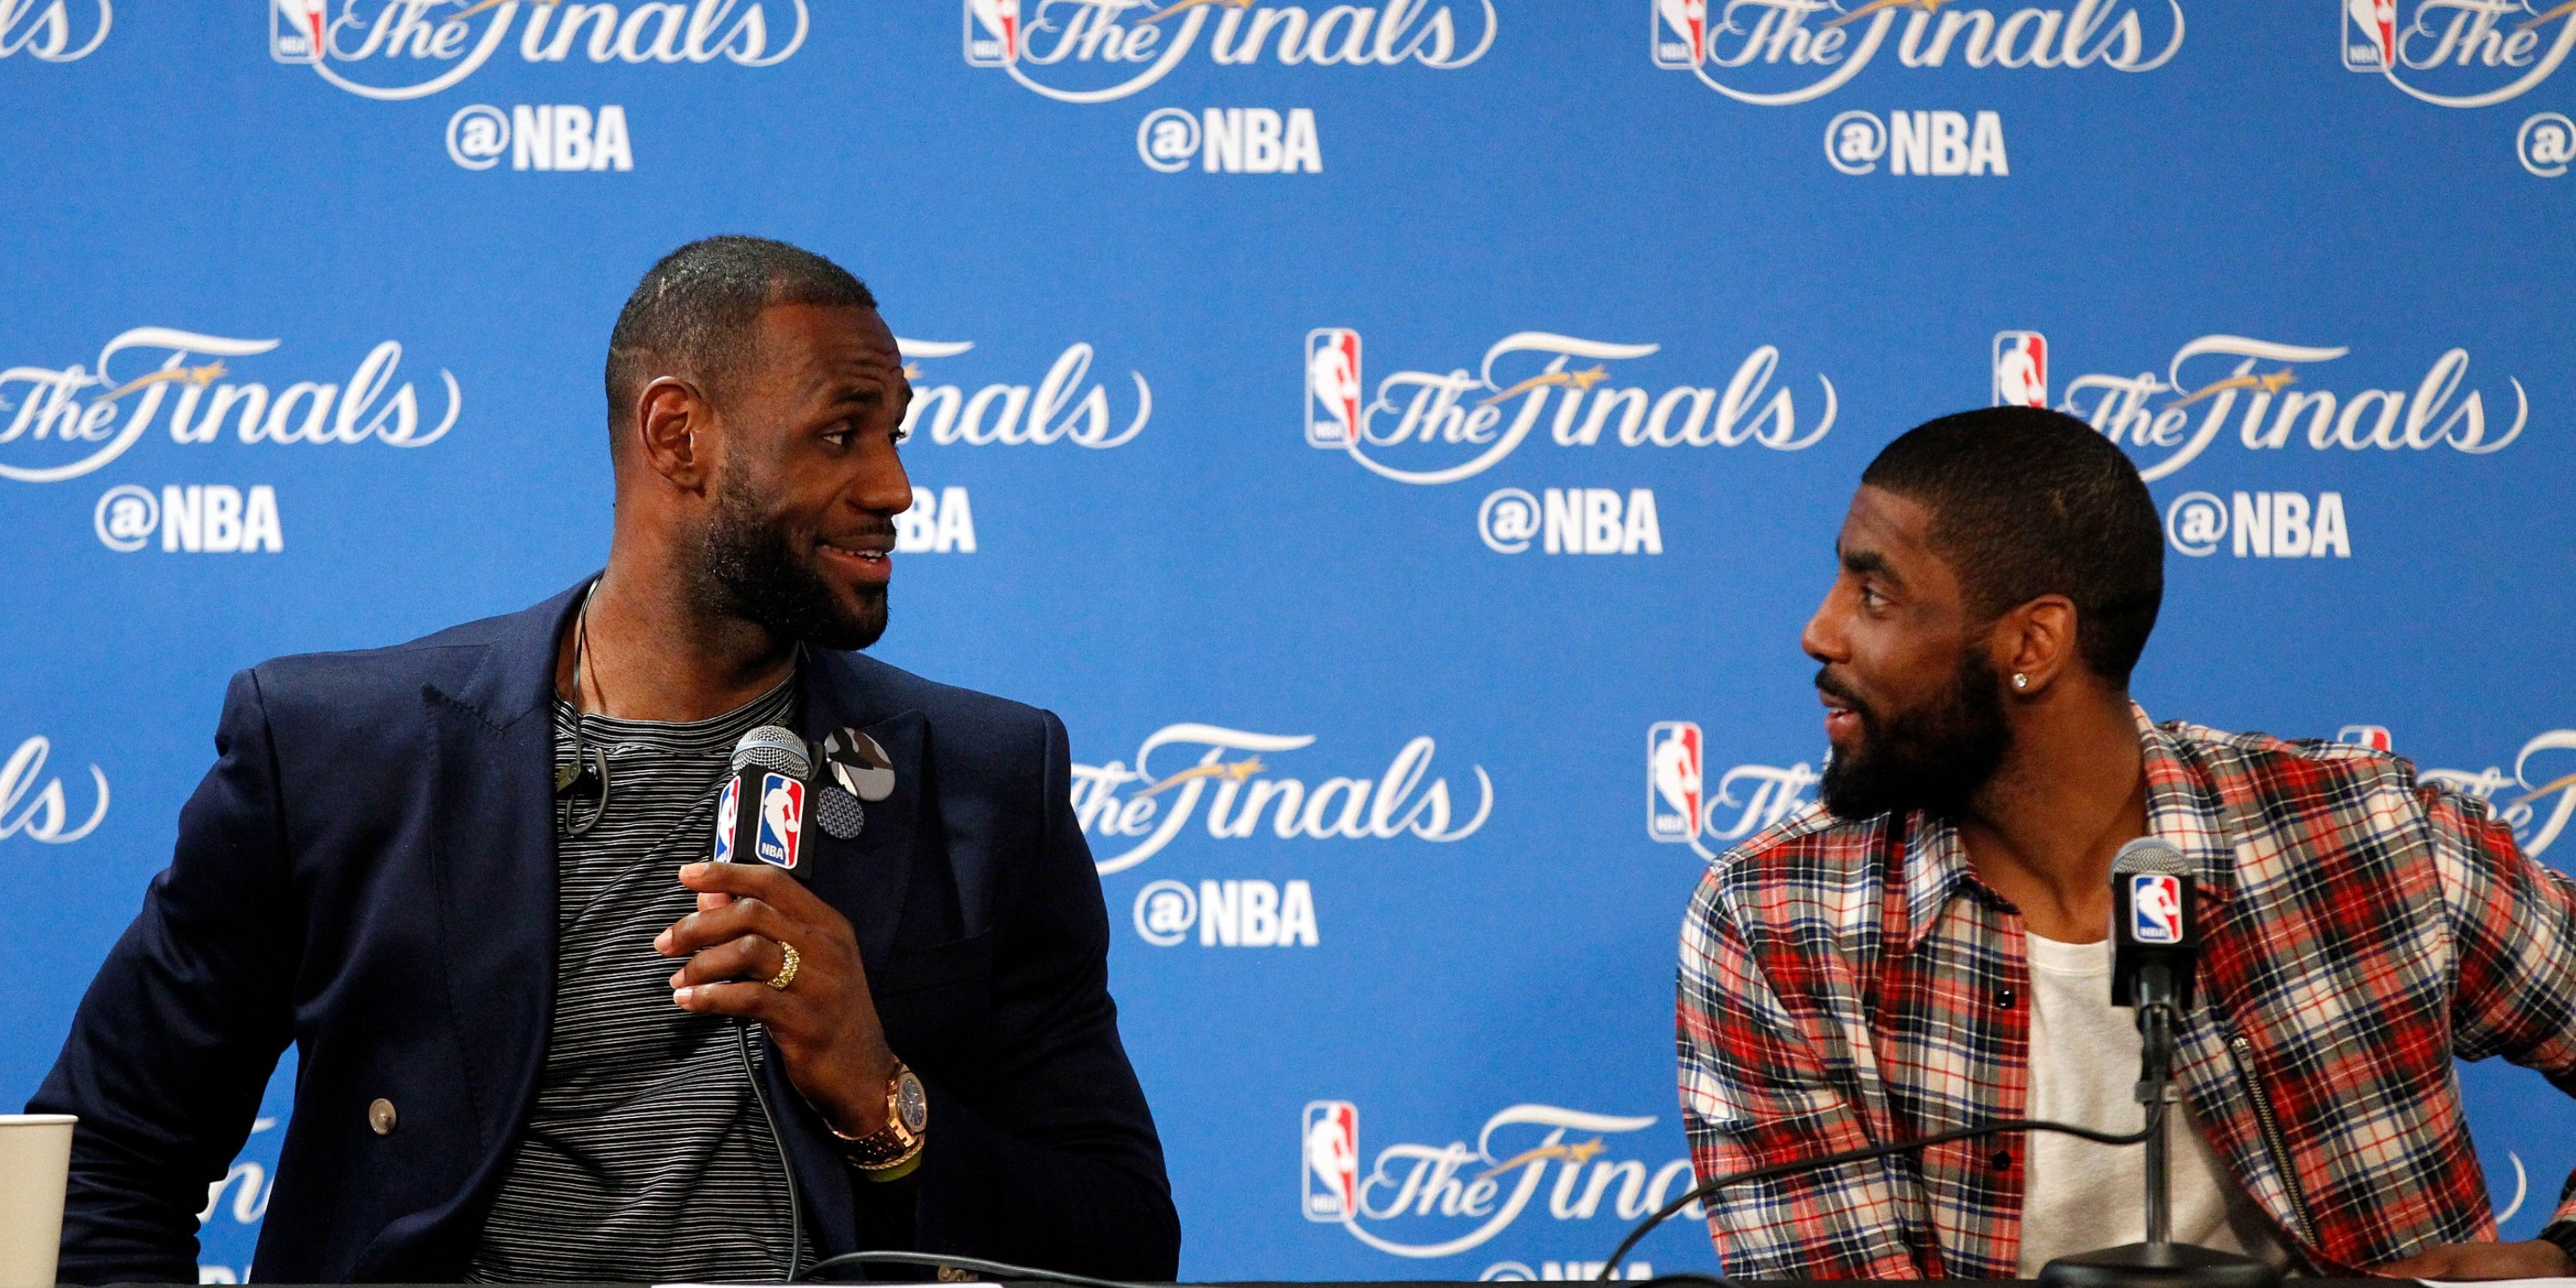 Cleveland Cavaliers LeBron James and Kyrie Irving after Game 5 of the 2016 NBA Finals.